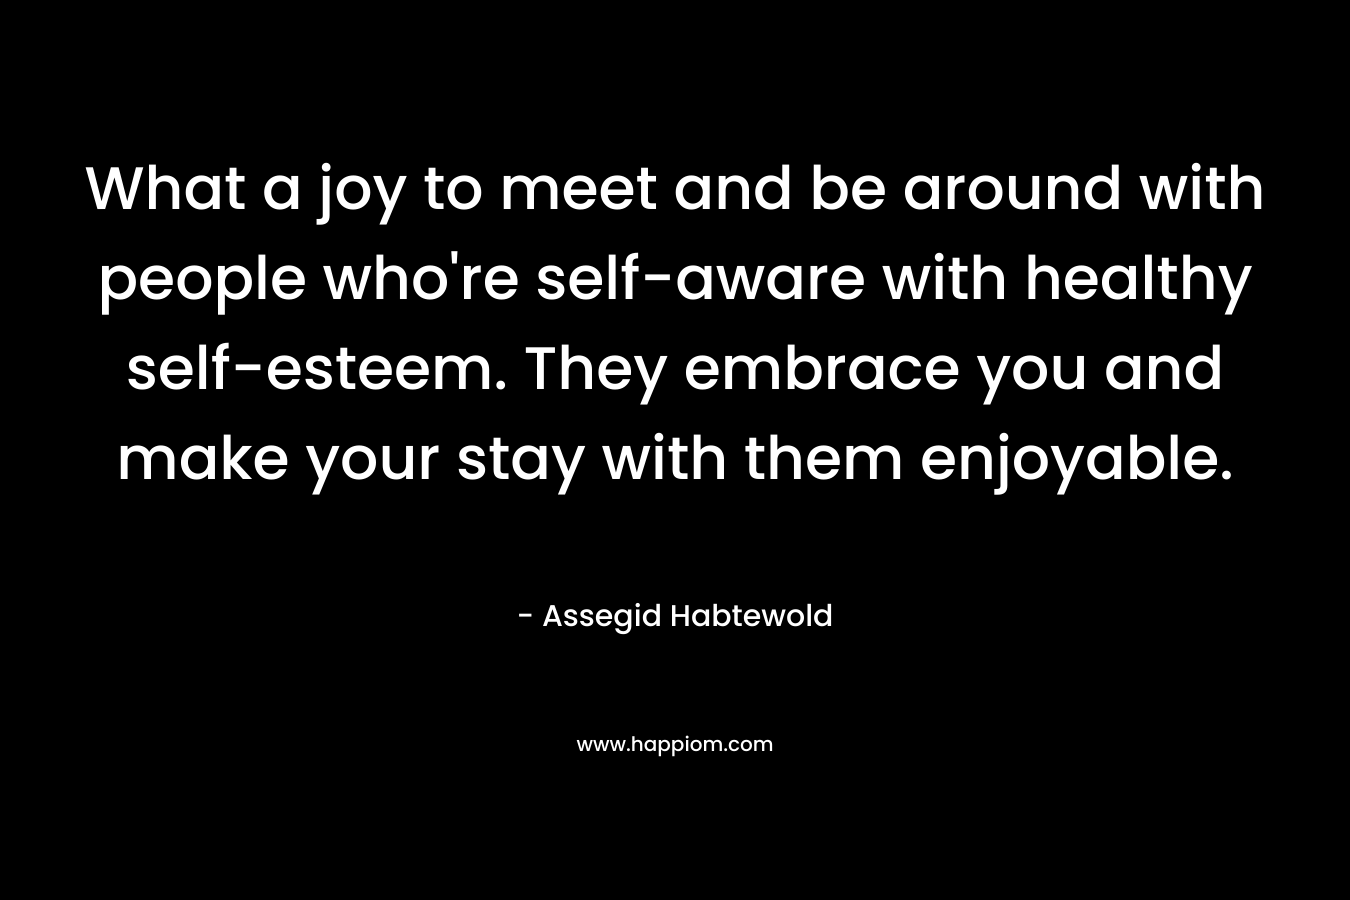 What a joy to meet and be around with people who're self-aware with healthy self-esteem. They embrace you and make your stay with them enjoyable.